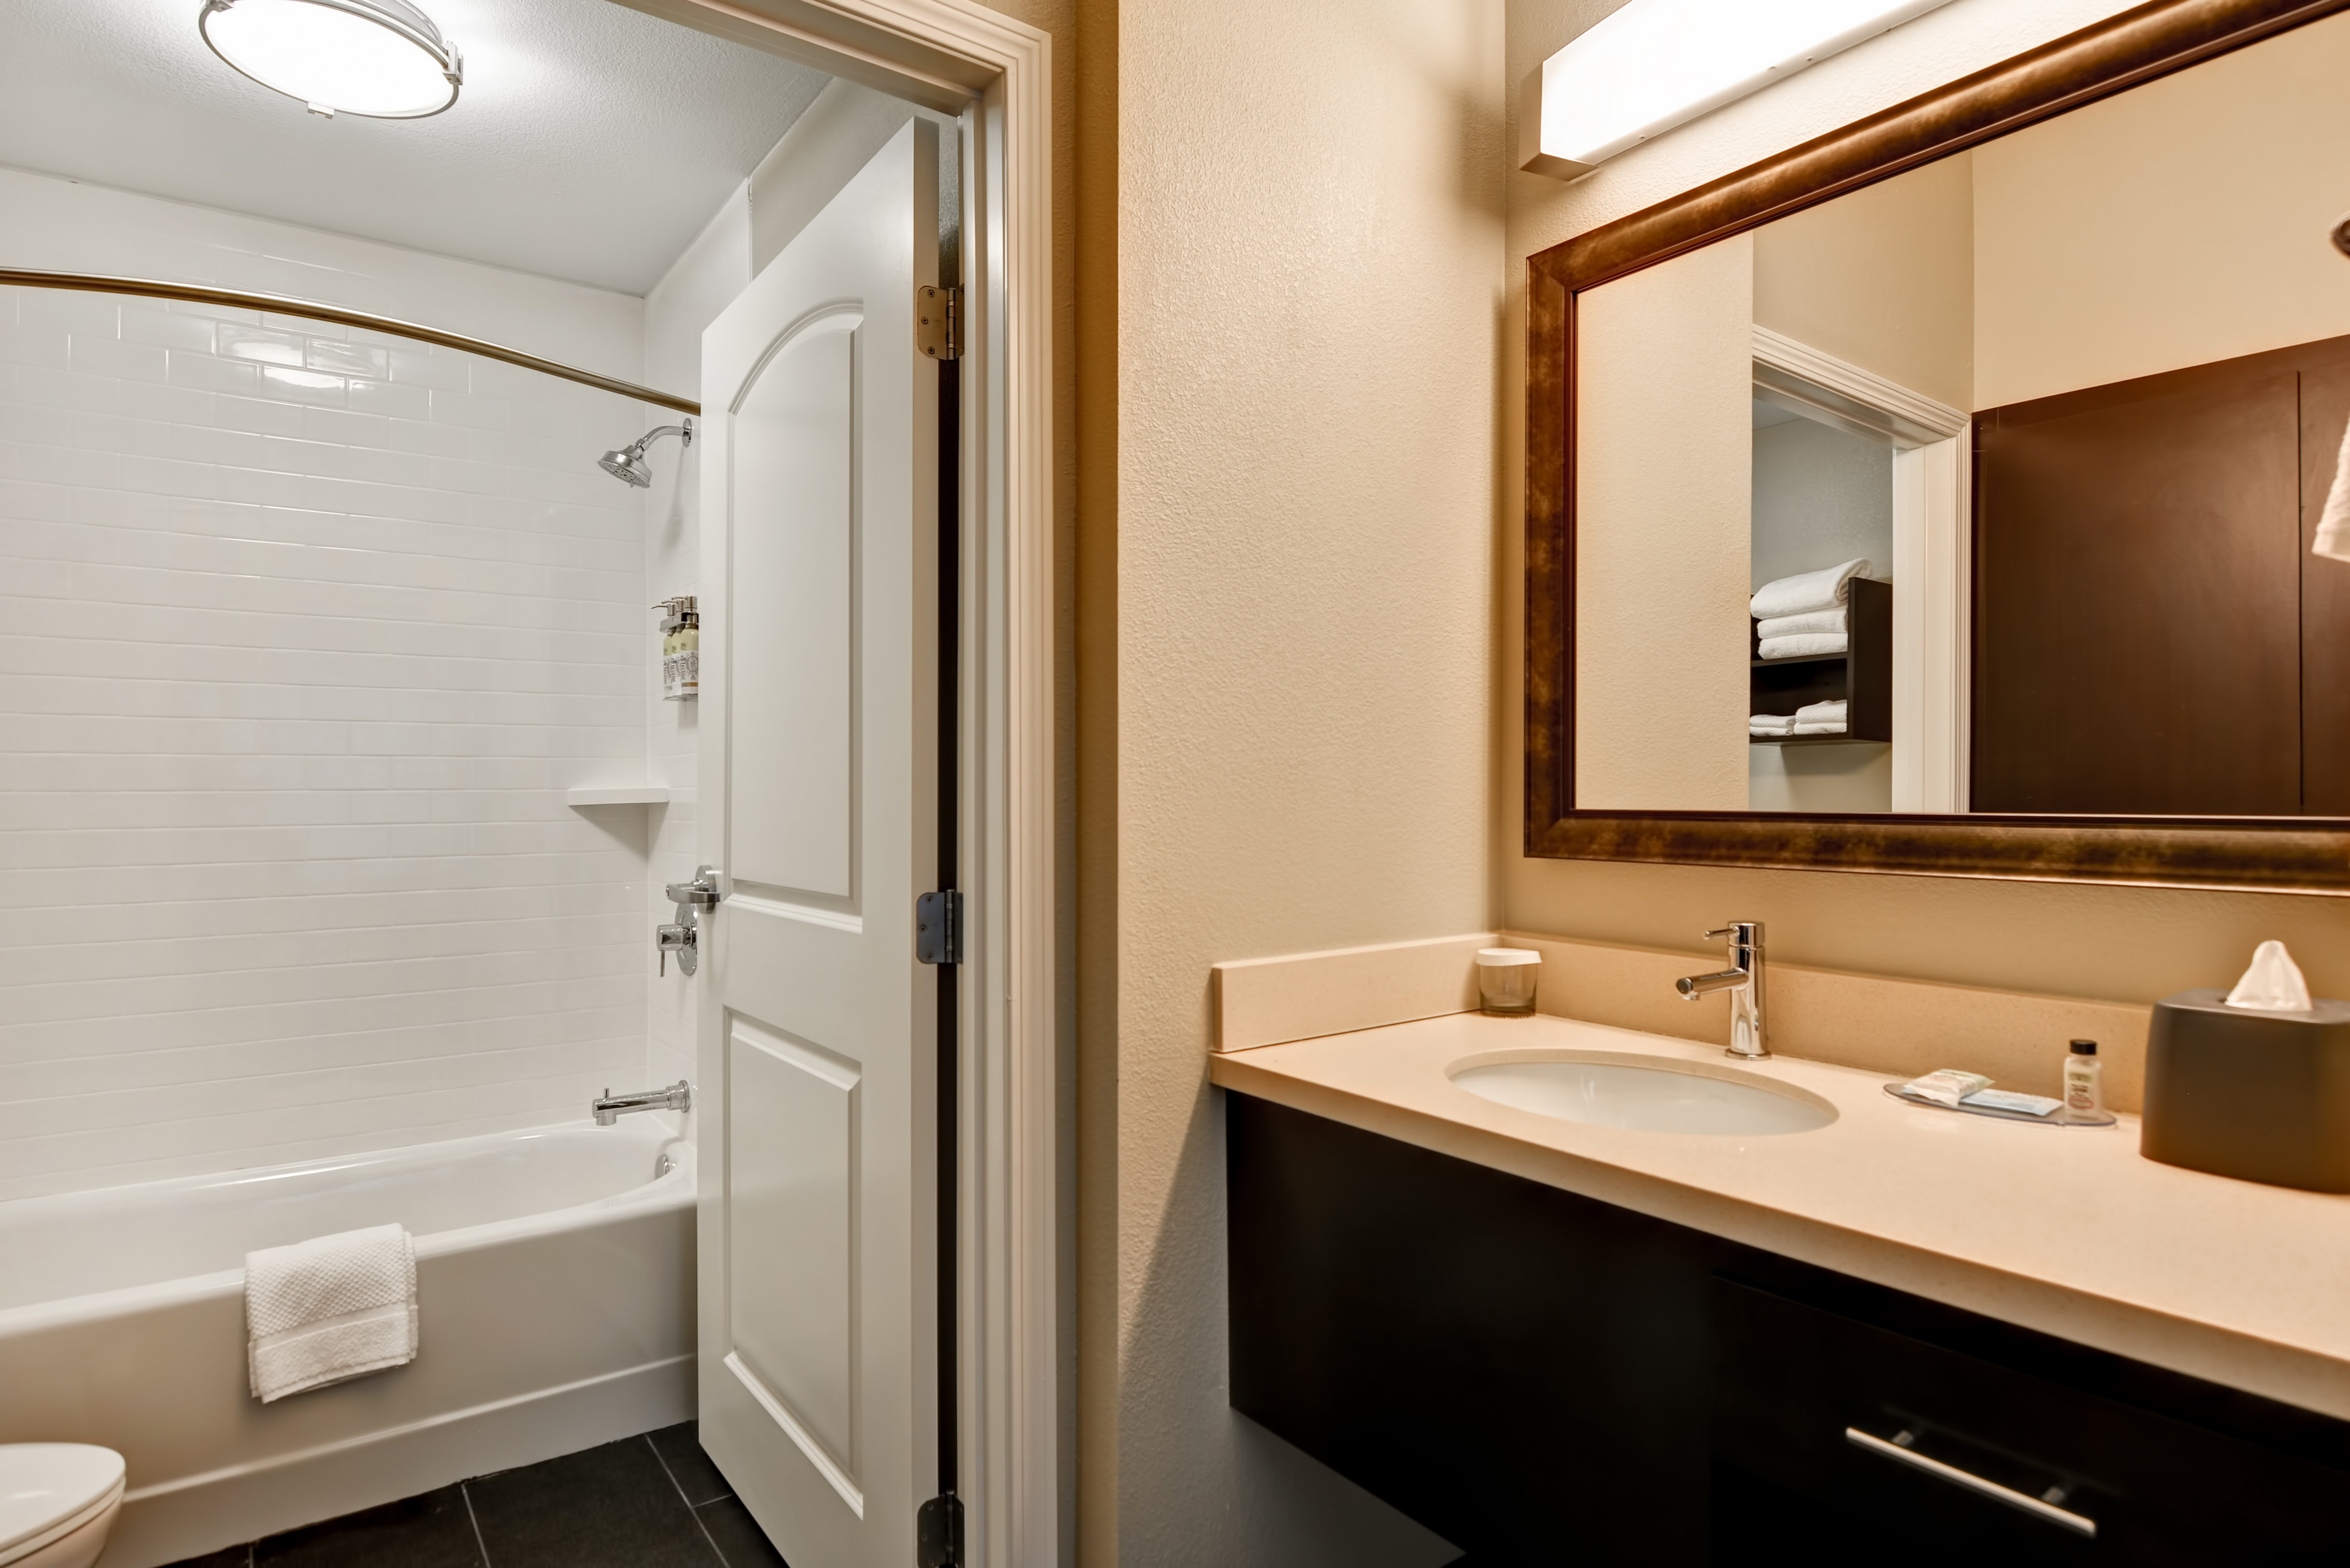 Spacious suite bathroom with bathtub & ample counter space. 